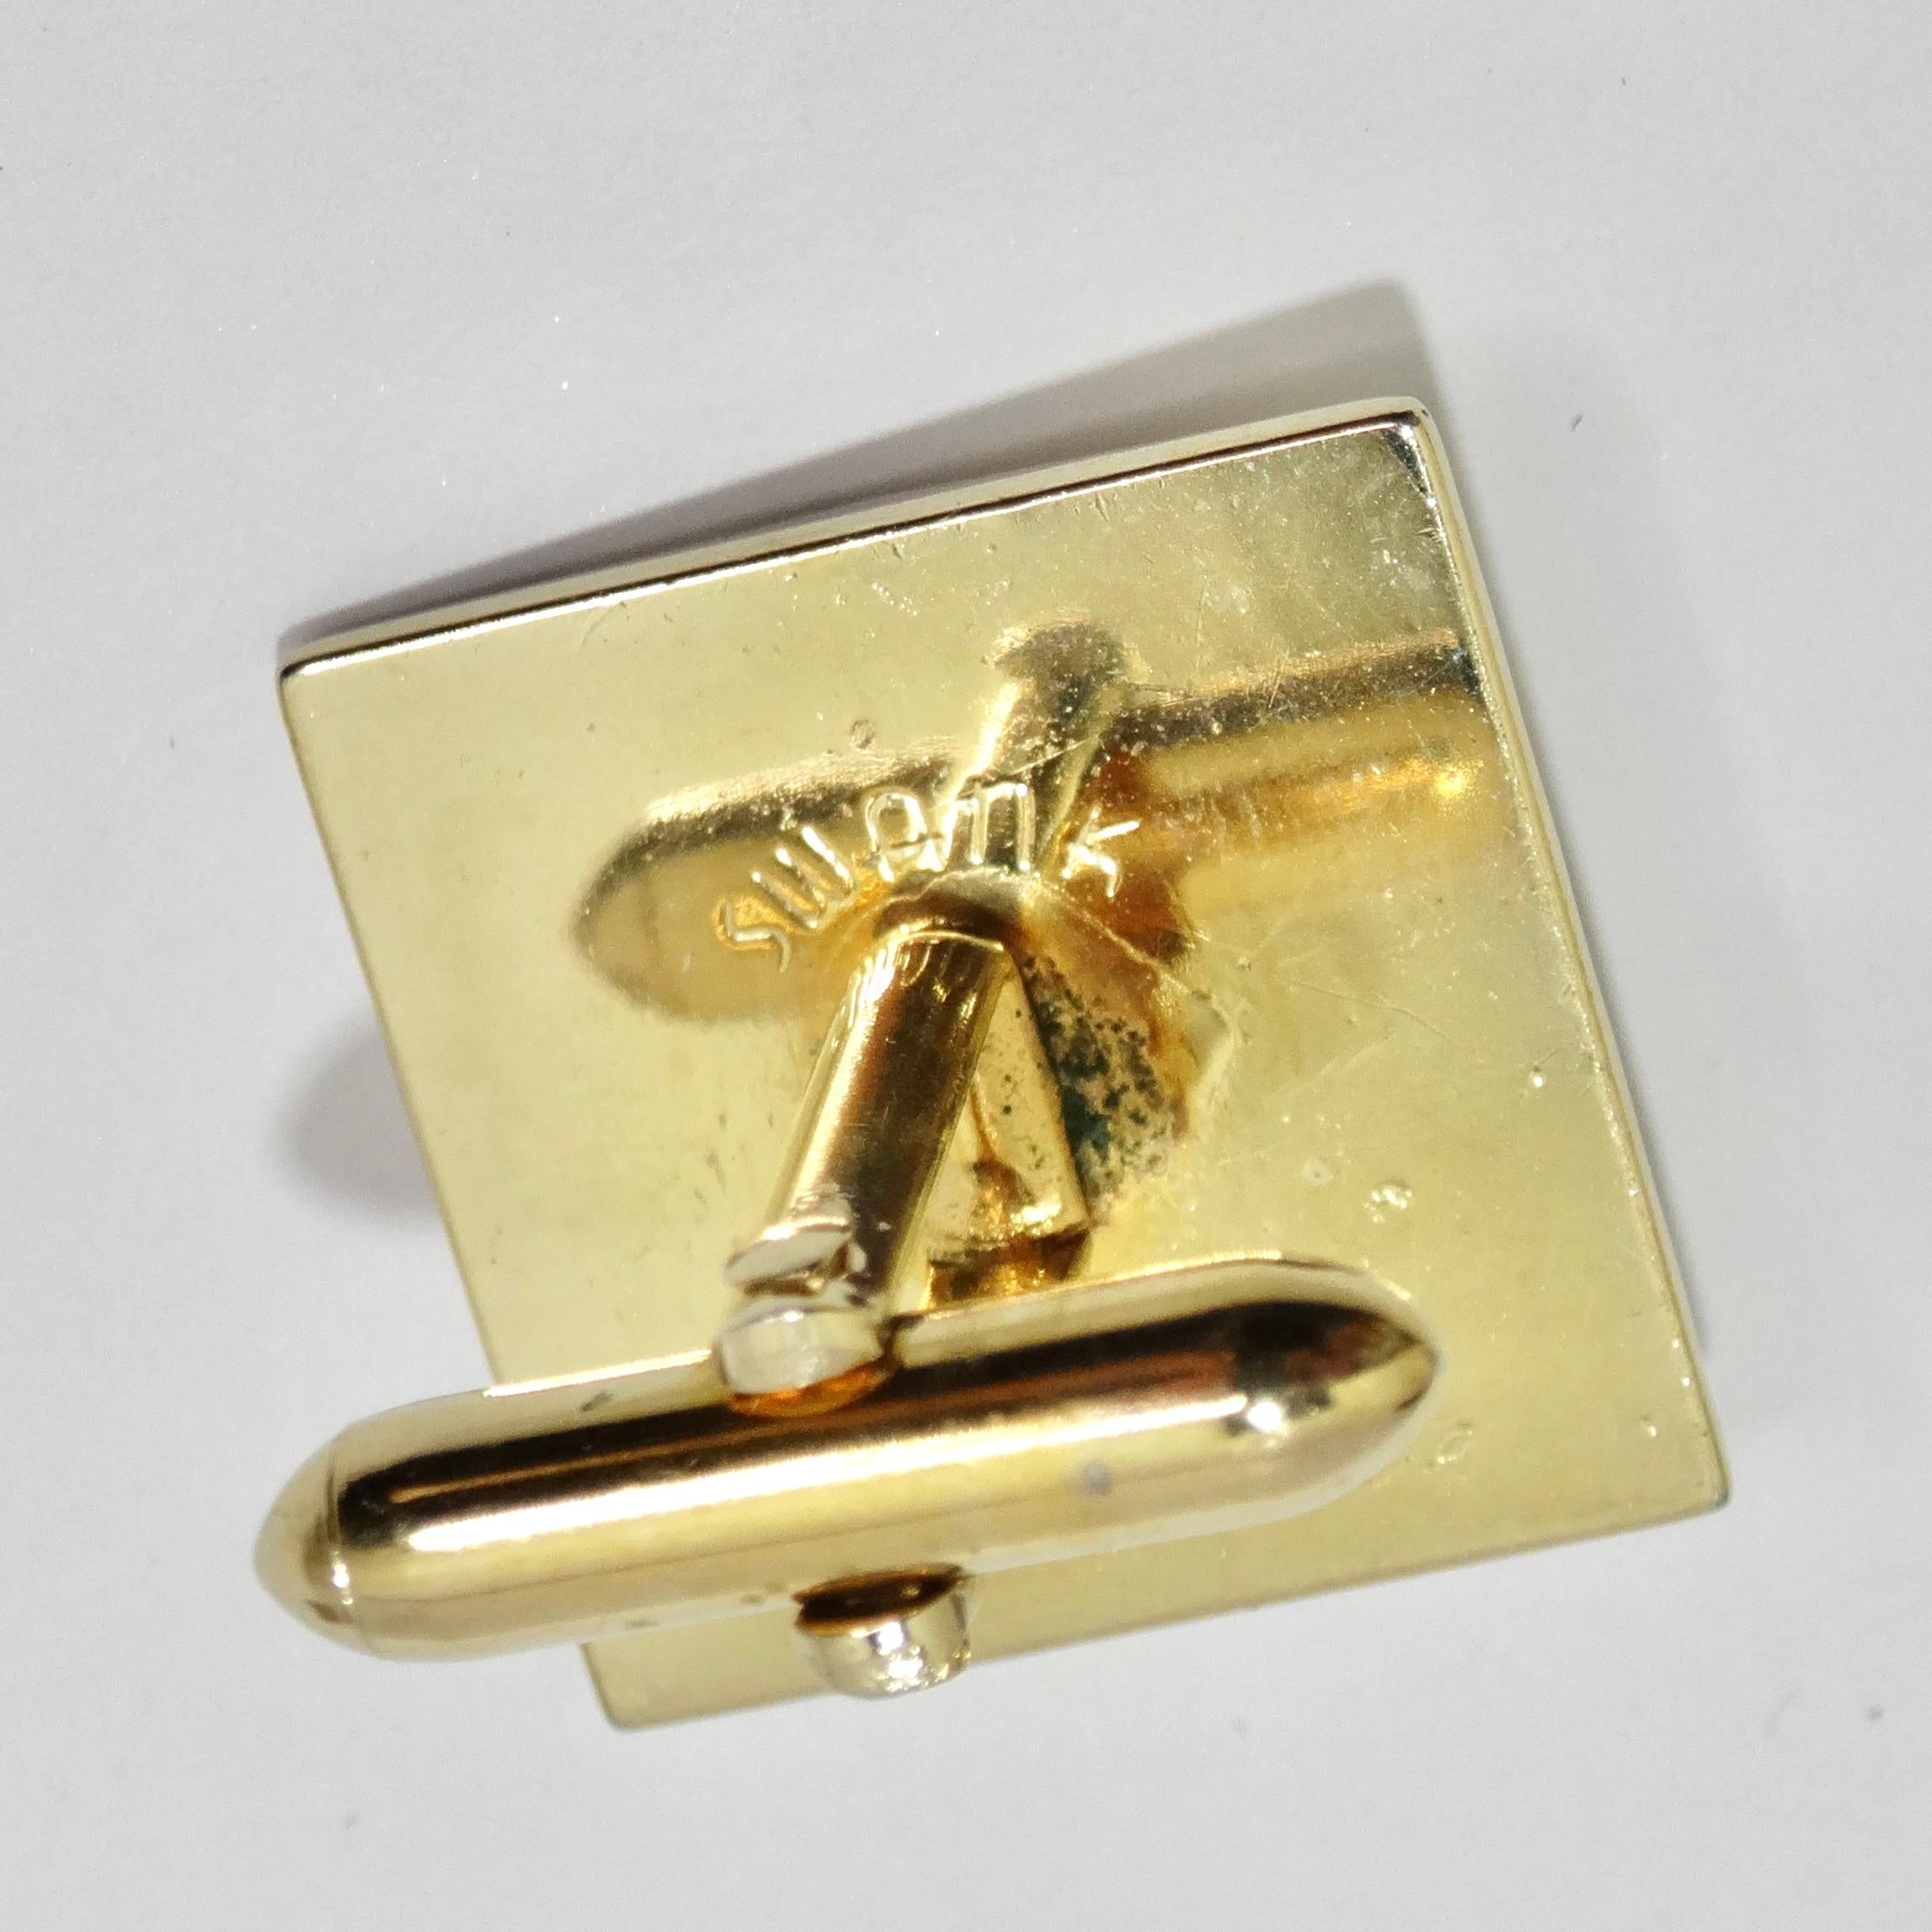 Swank 18K Gold Plated Vintage Cuff Links and Tie Clip Set For Sale 5